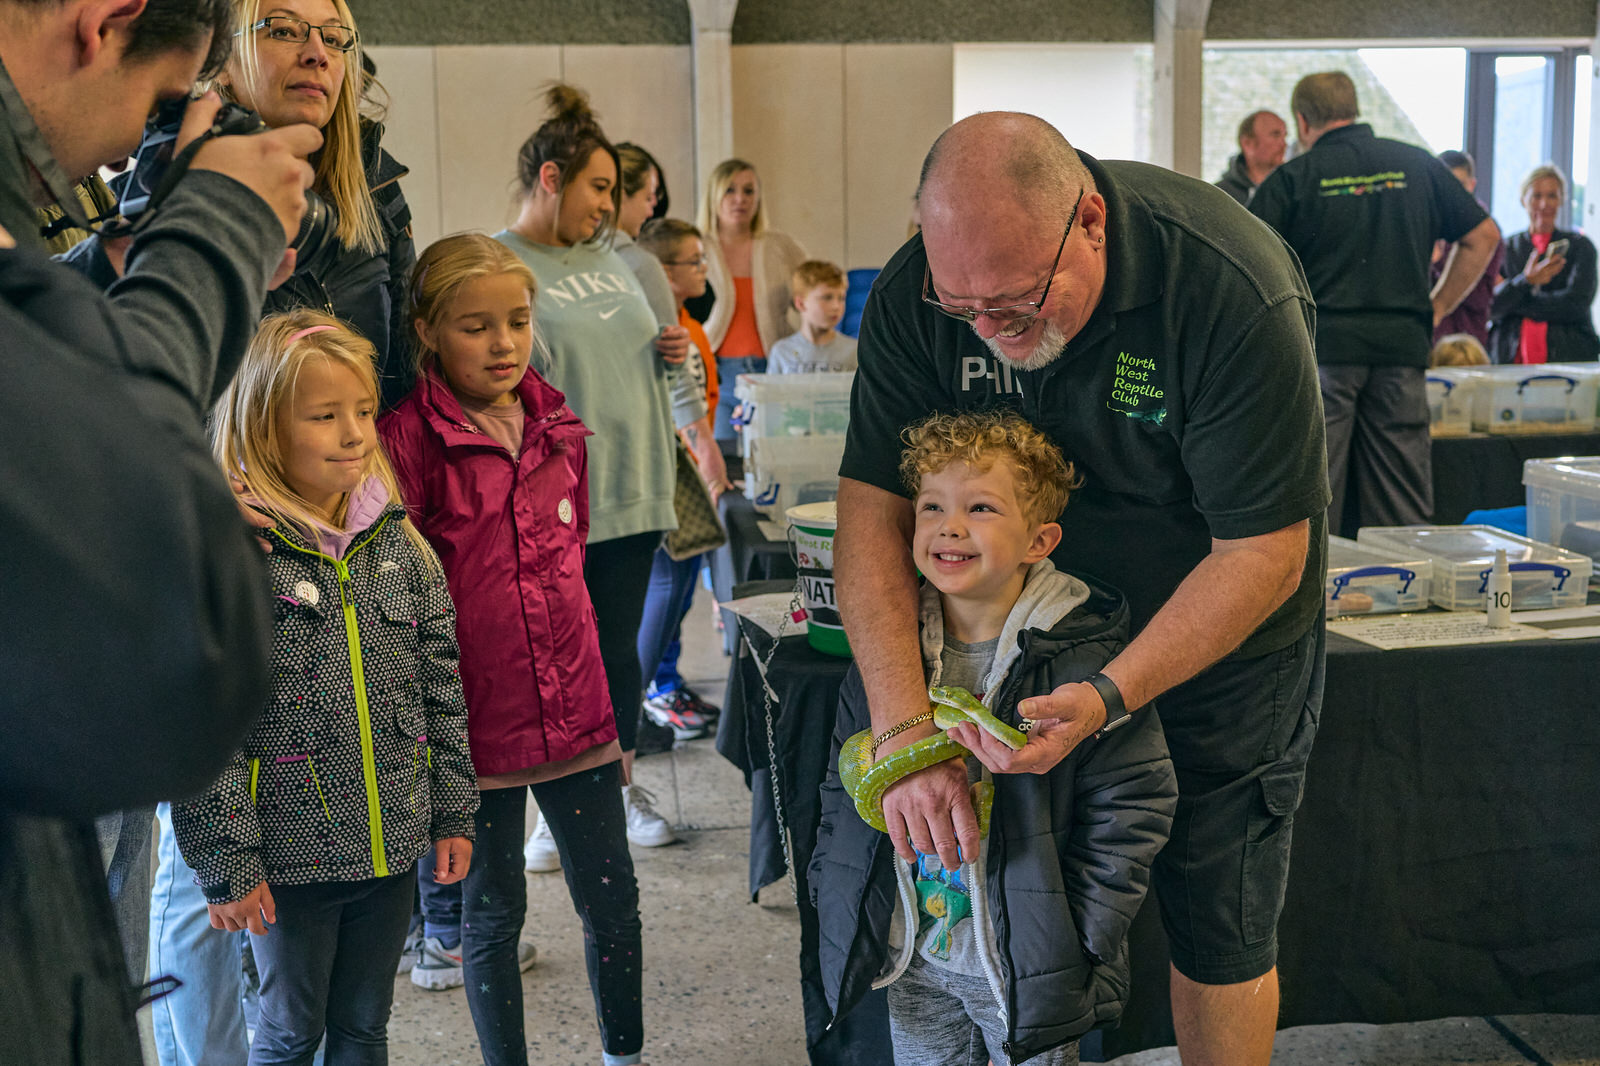 Phil the chairman of the NW Reptile club helps a child hold a snake